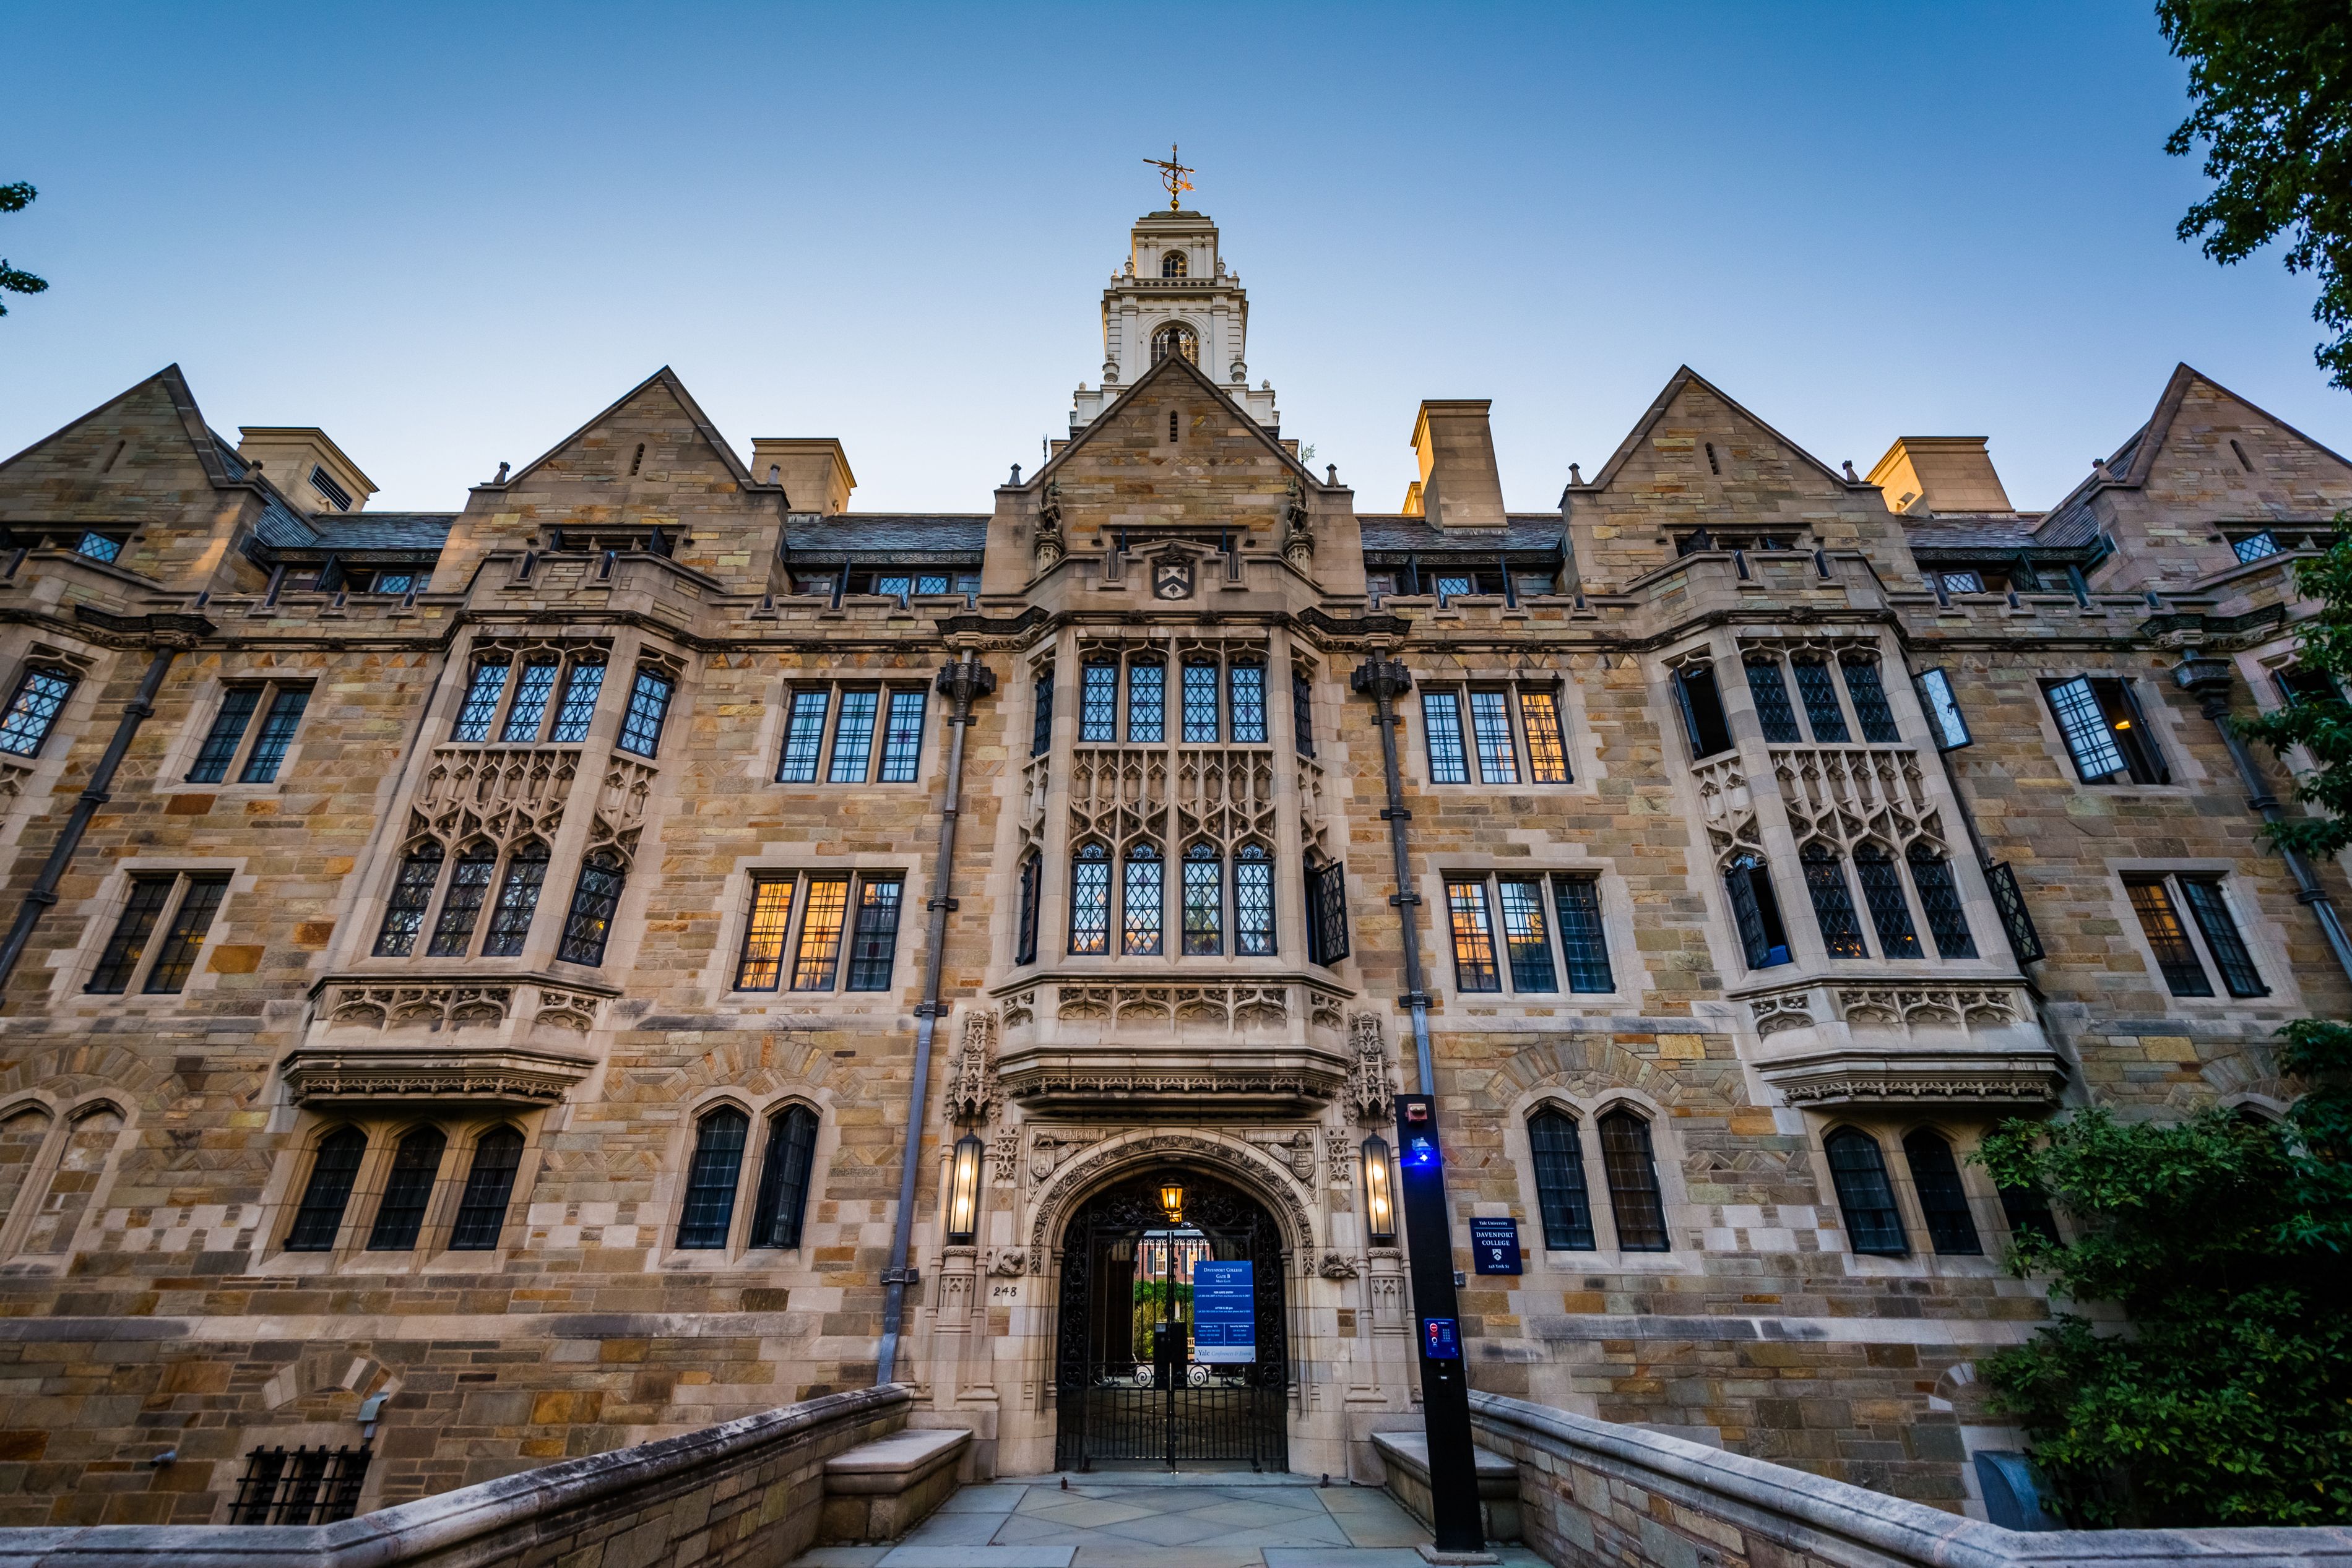 The Davenport College Building at Yale University, in New Haven, Connecticut. Image by Jon Bilous / Shutterstock. United States, undated.